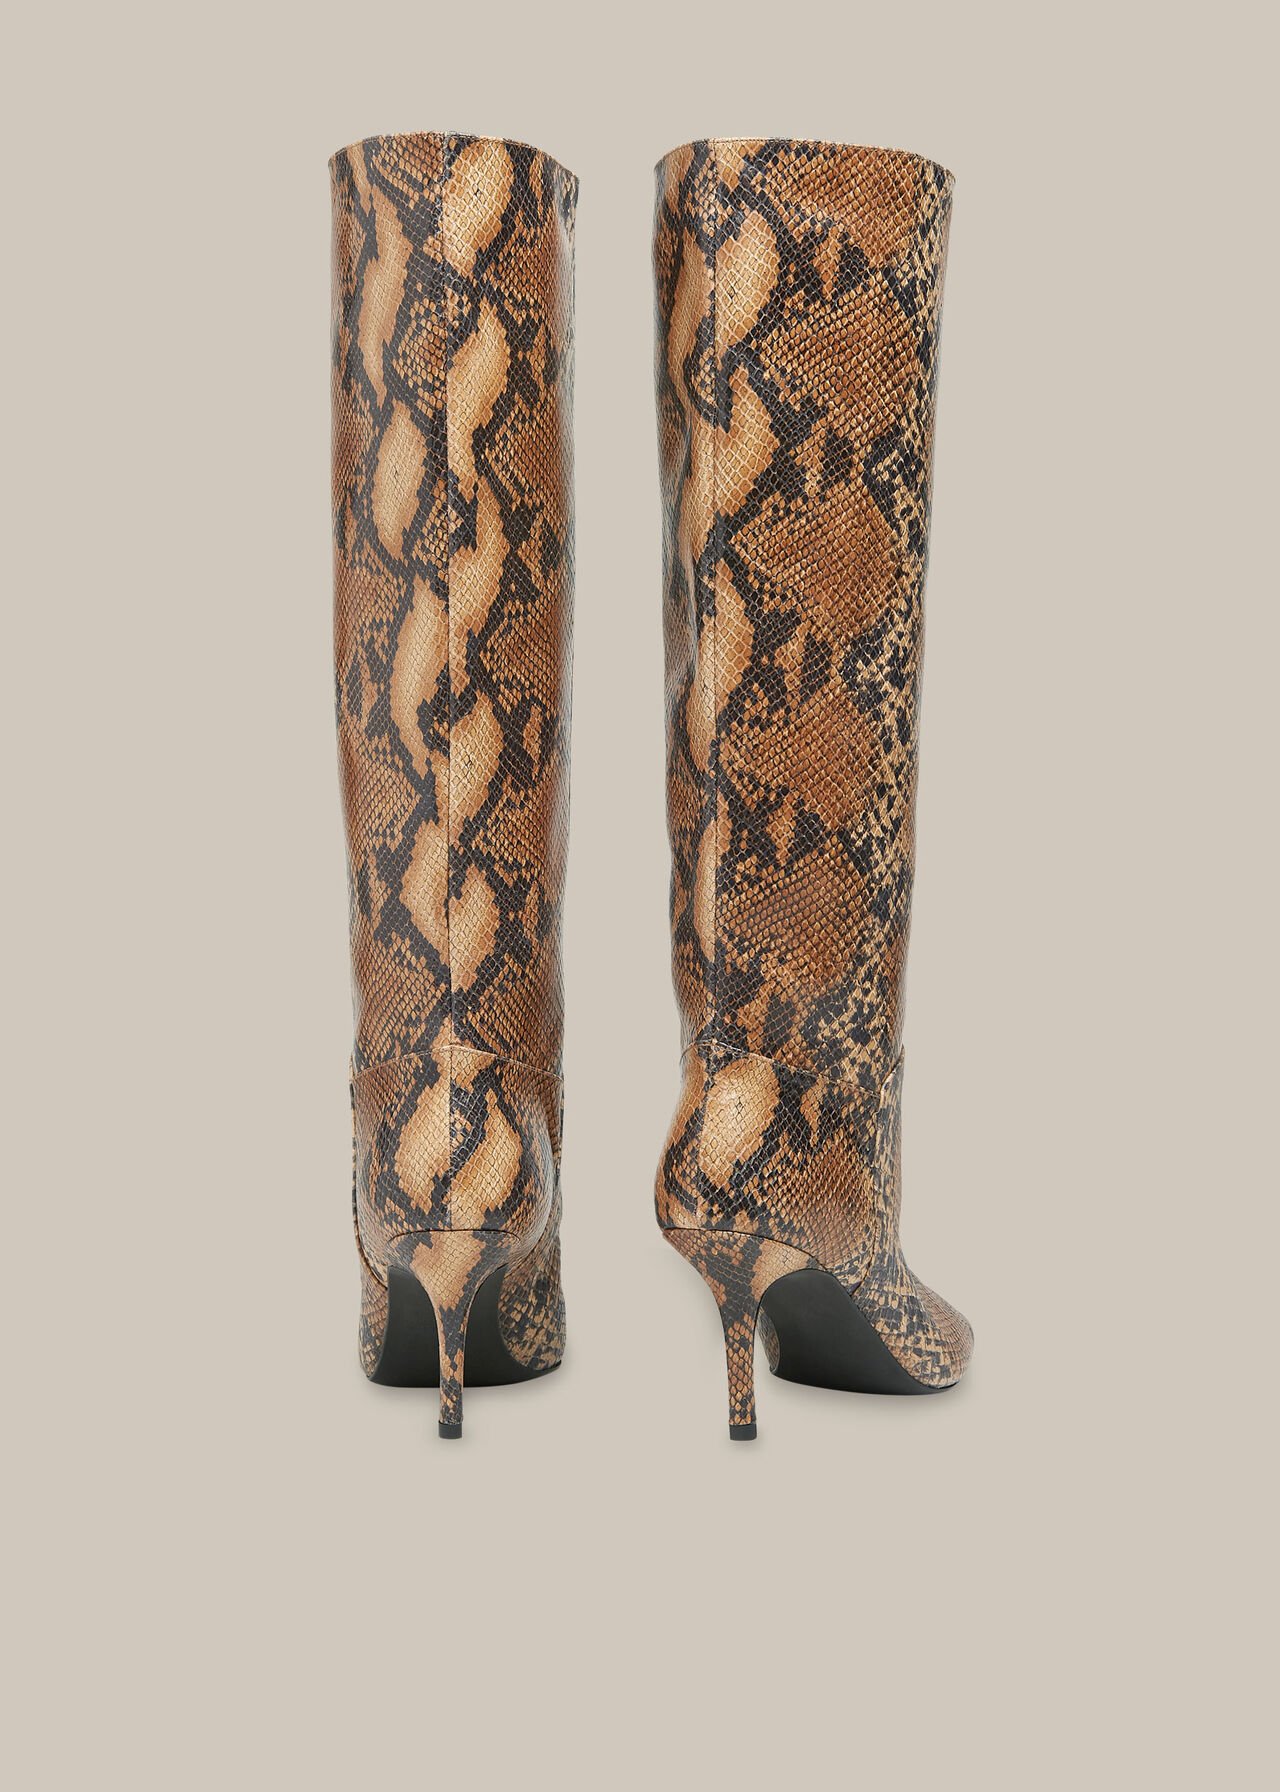 Conna Snake Knee High Boot Brown/Multi